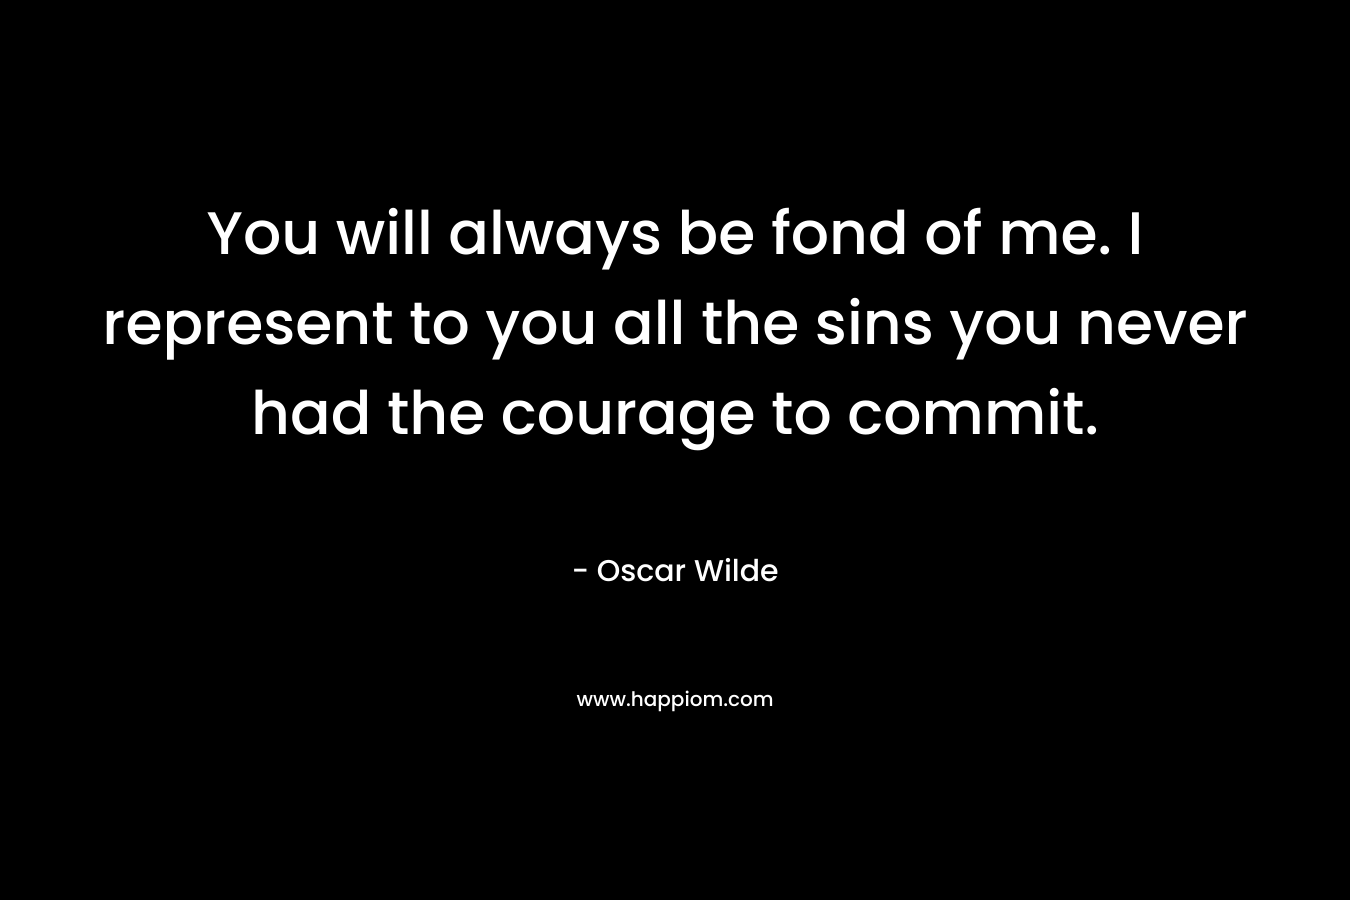 You will always be fond of me. I represent to you all the sins you never had the courage to commit. – Oscar Wilde